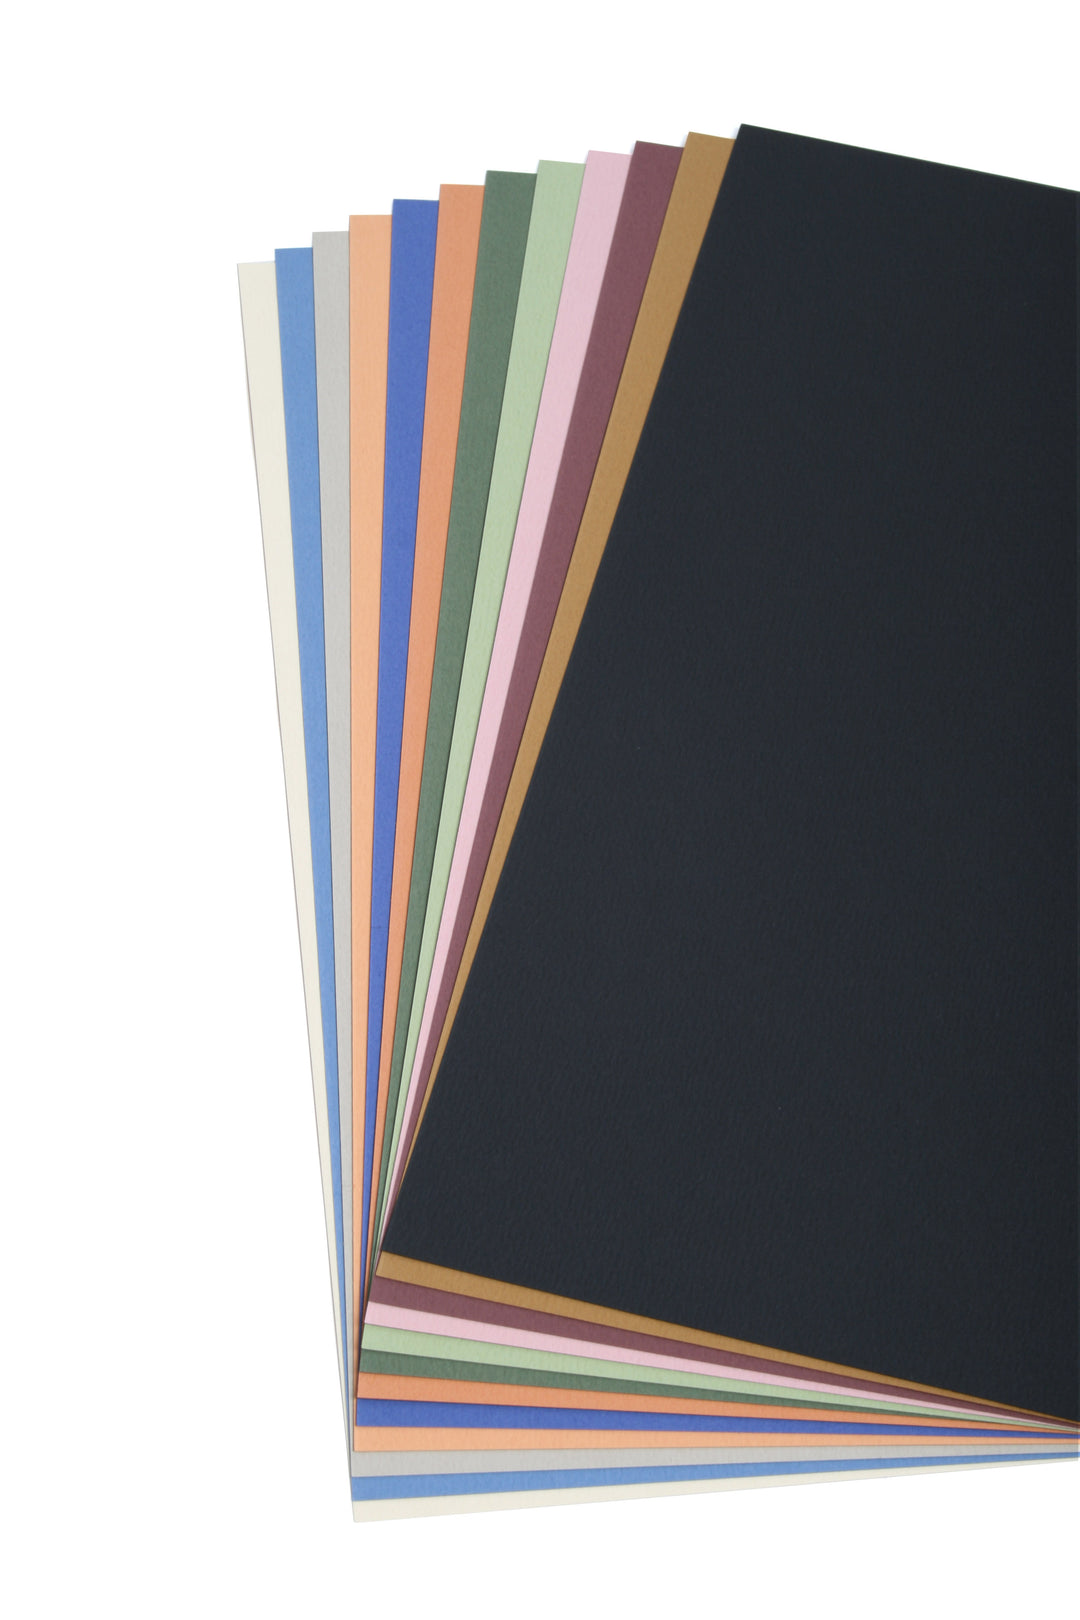 Clairefontaine Fine Art Grained Etival Drawing Paper 160g 12 Pastel Colour Sheets - 320 mm x 240 mm